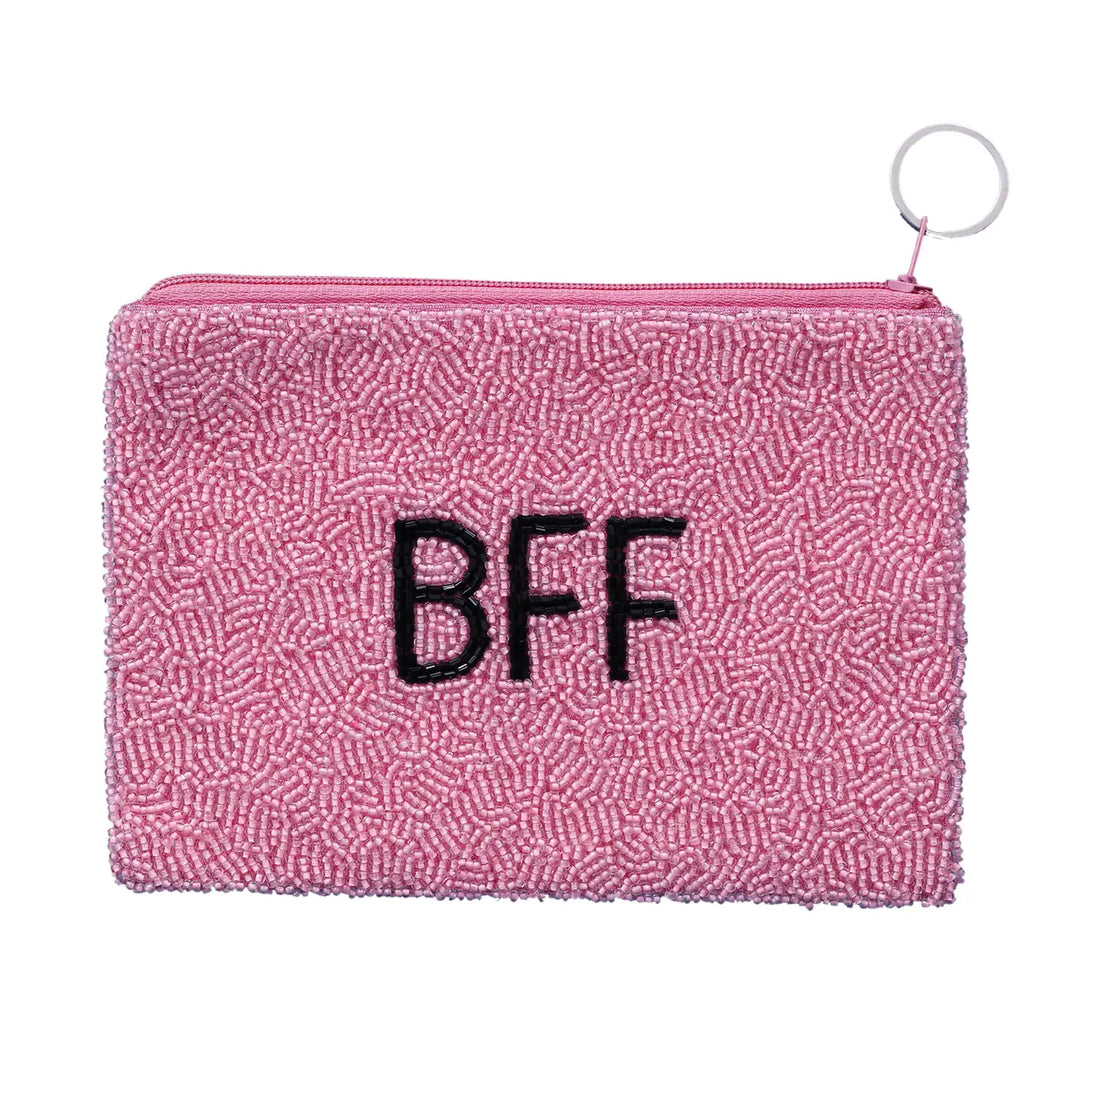 Shop Tiana Designs Hand Beaded Botox Fillers Facials Coin Purse - Premium Purse from Tiana New York Online now at Spoiled Brat 